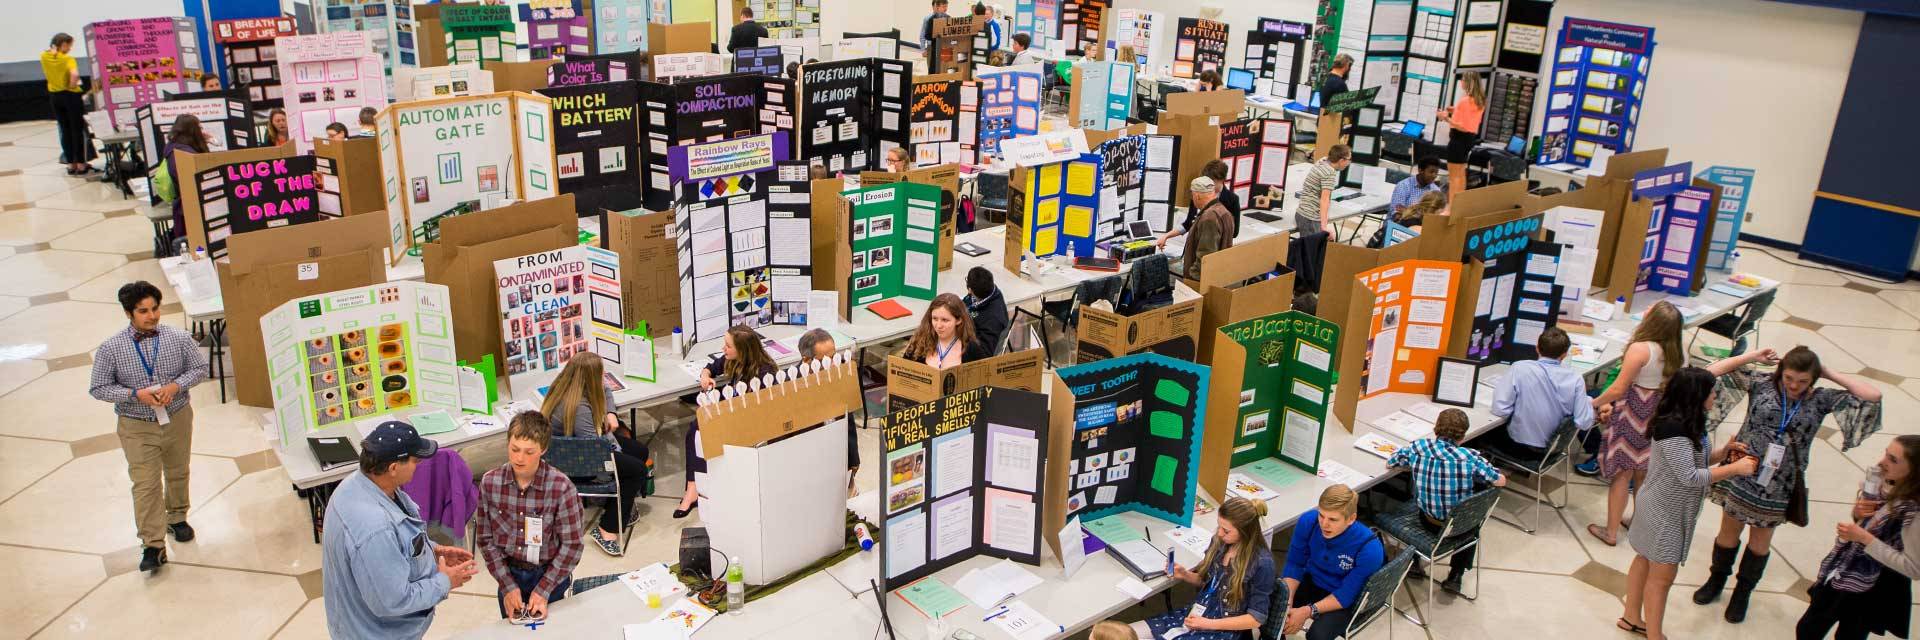 69th annual north dakota state science and engineering fair